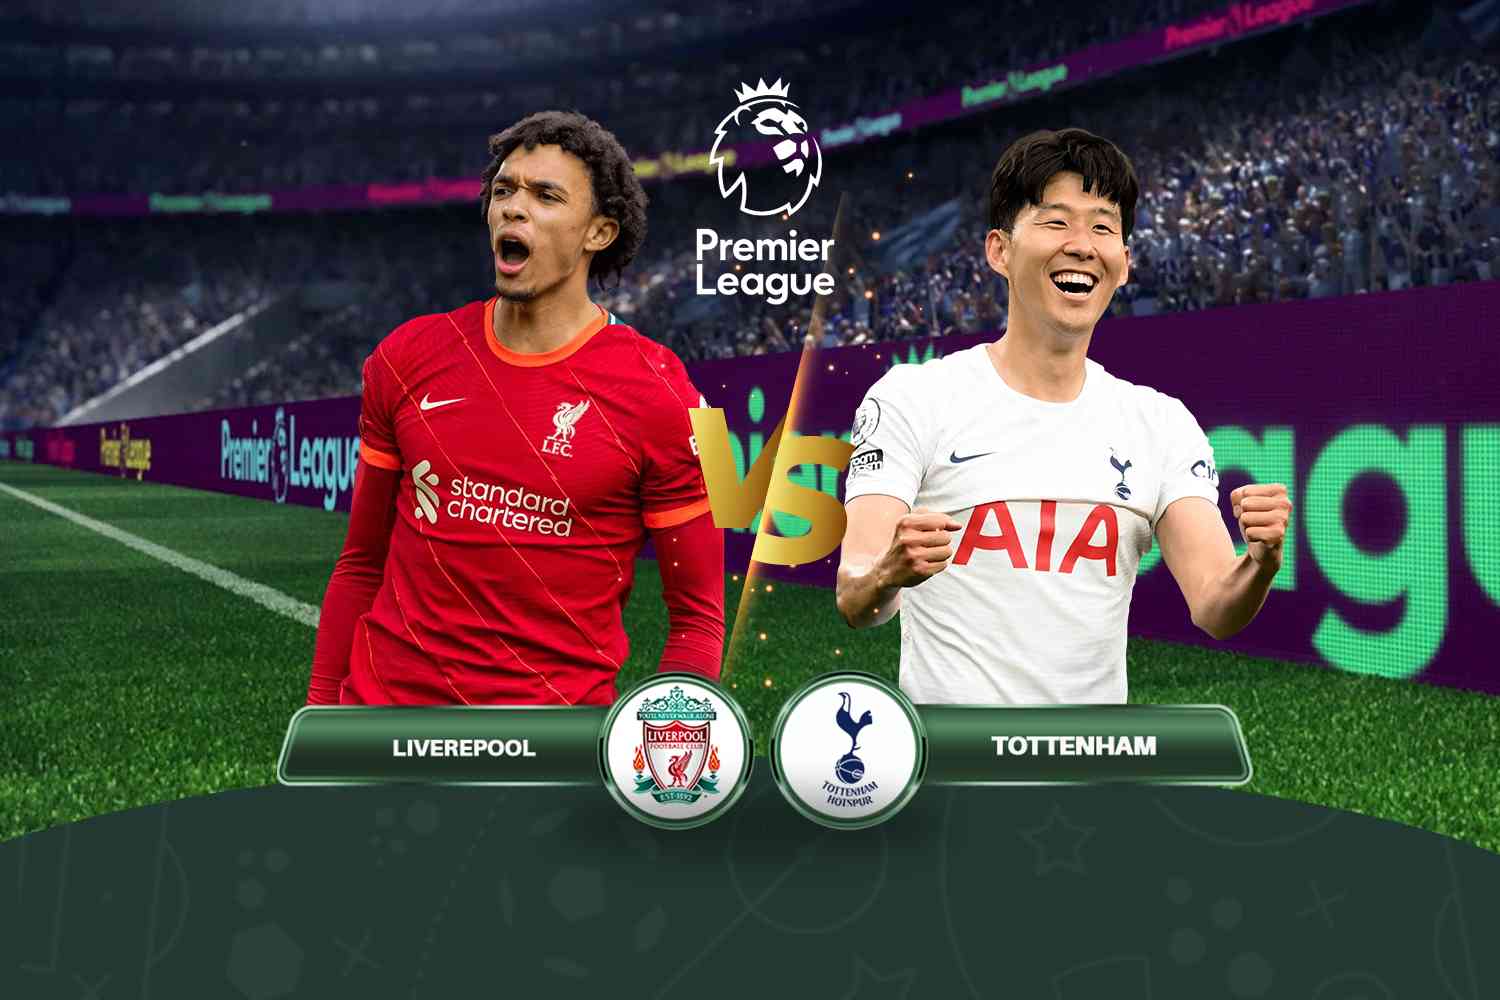 Liverpool vs Tottenham preview and betting prediction